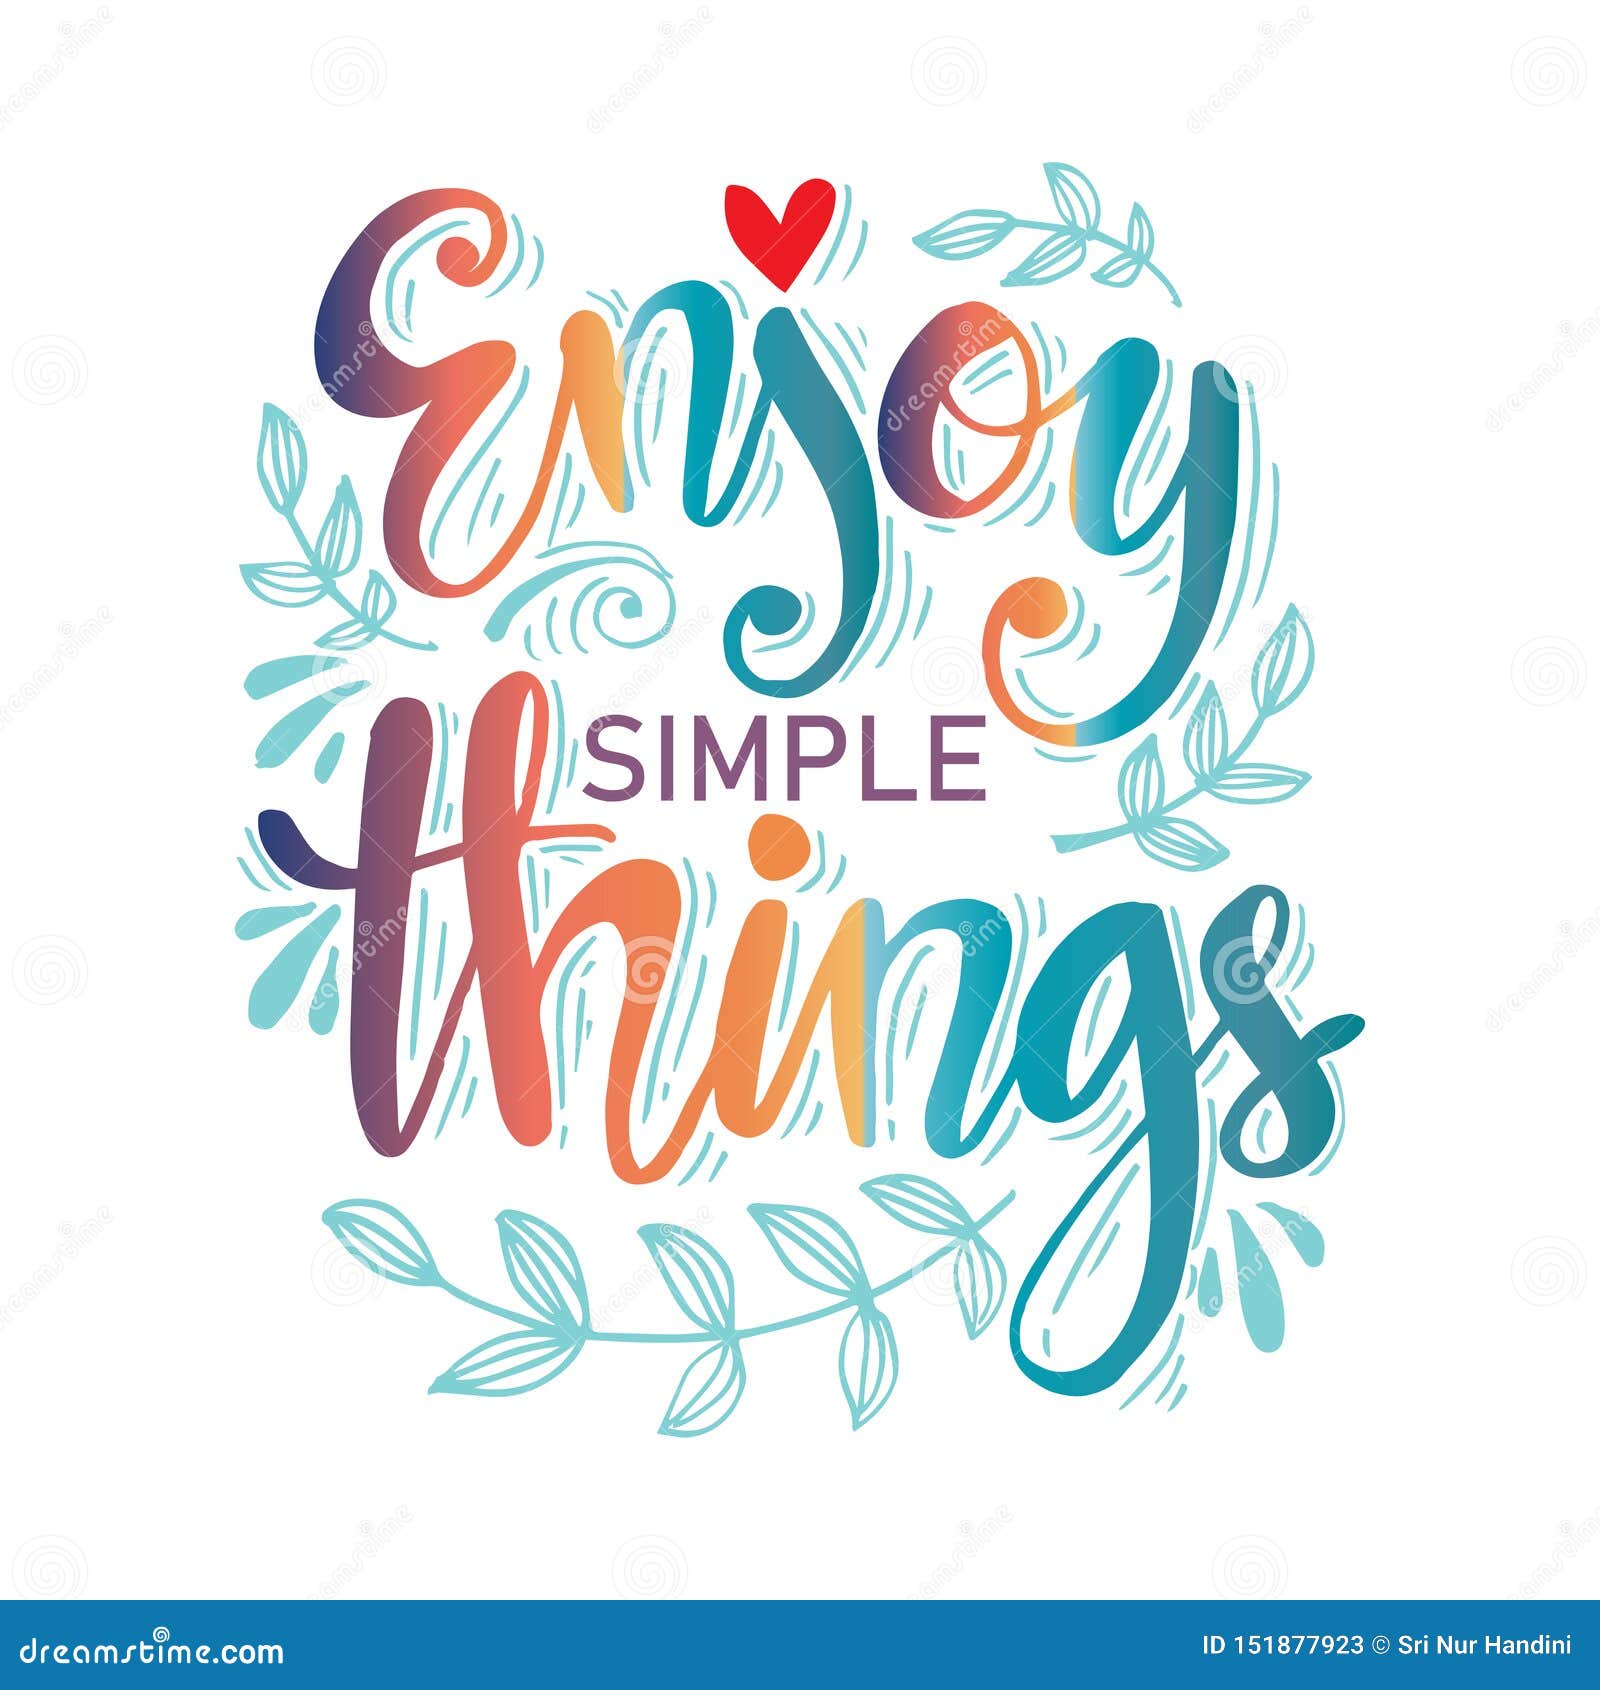 Enjoy simple things. Motivational quote. Enjoy simple things. Hand lettering. Motivational quote.